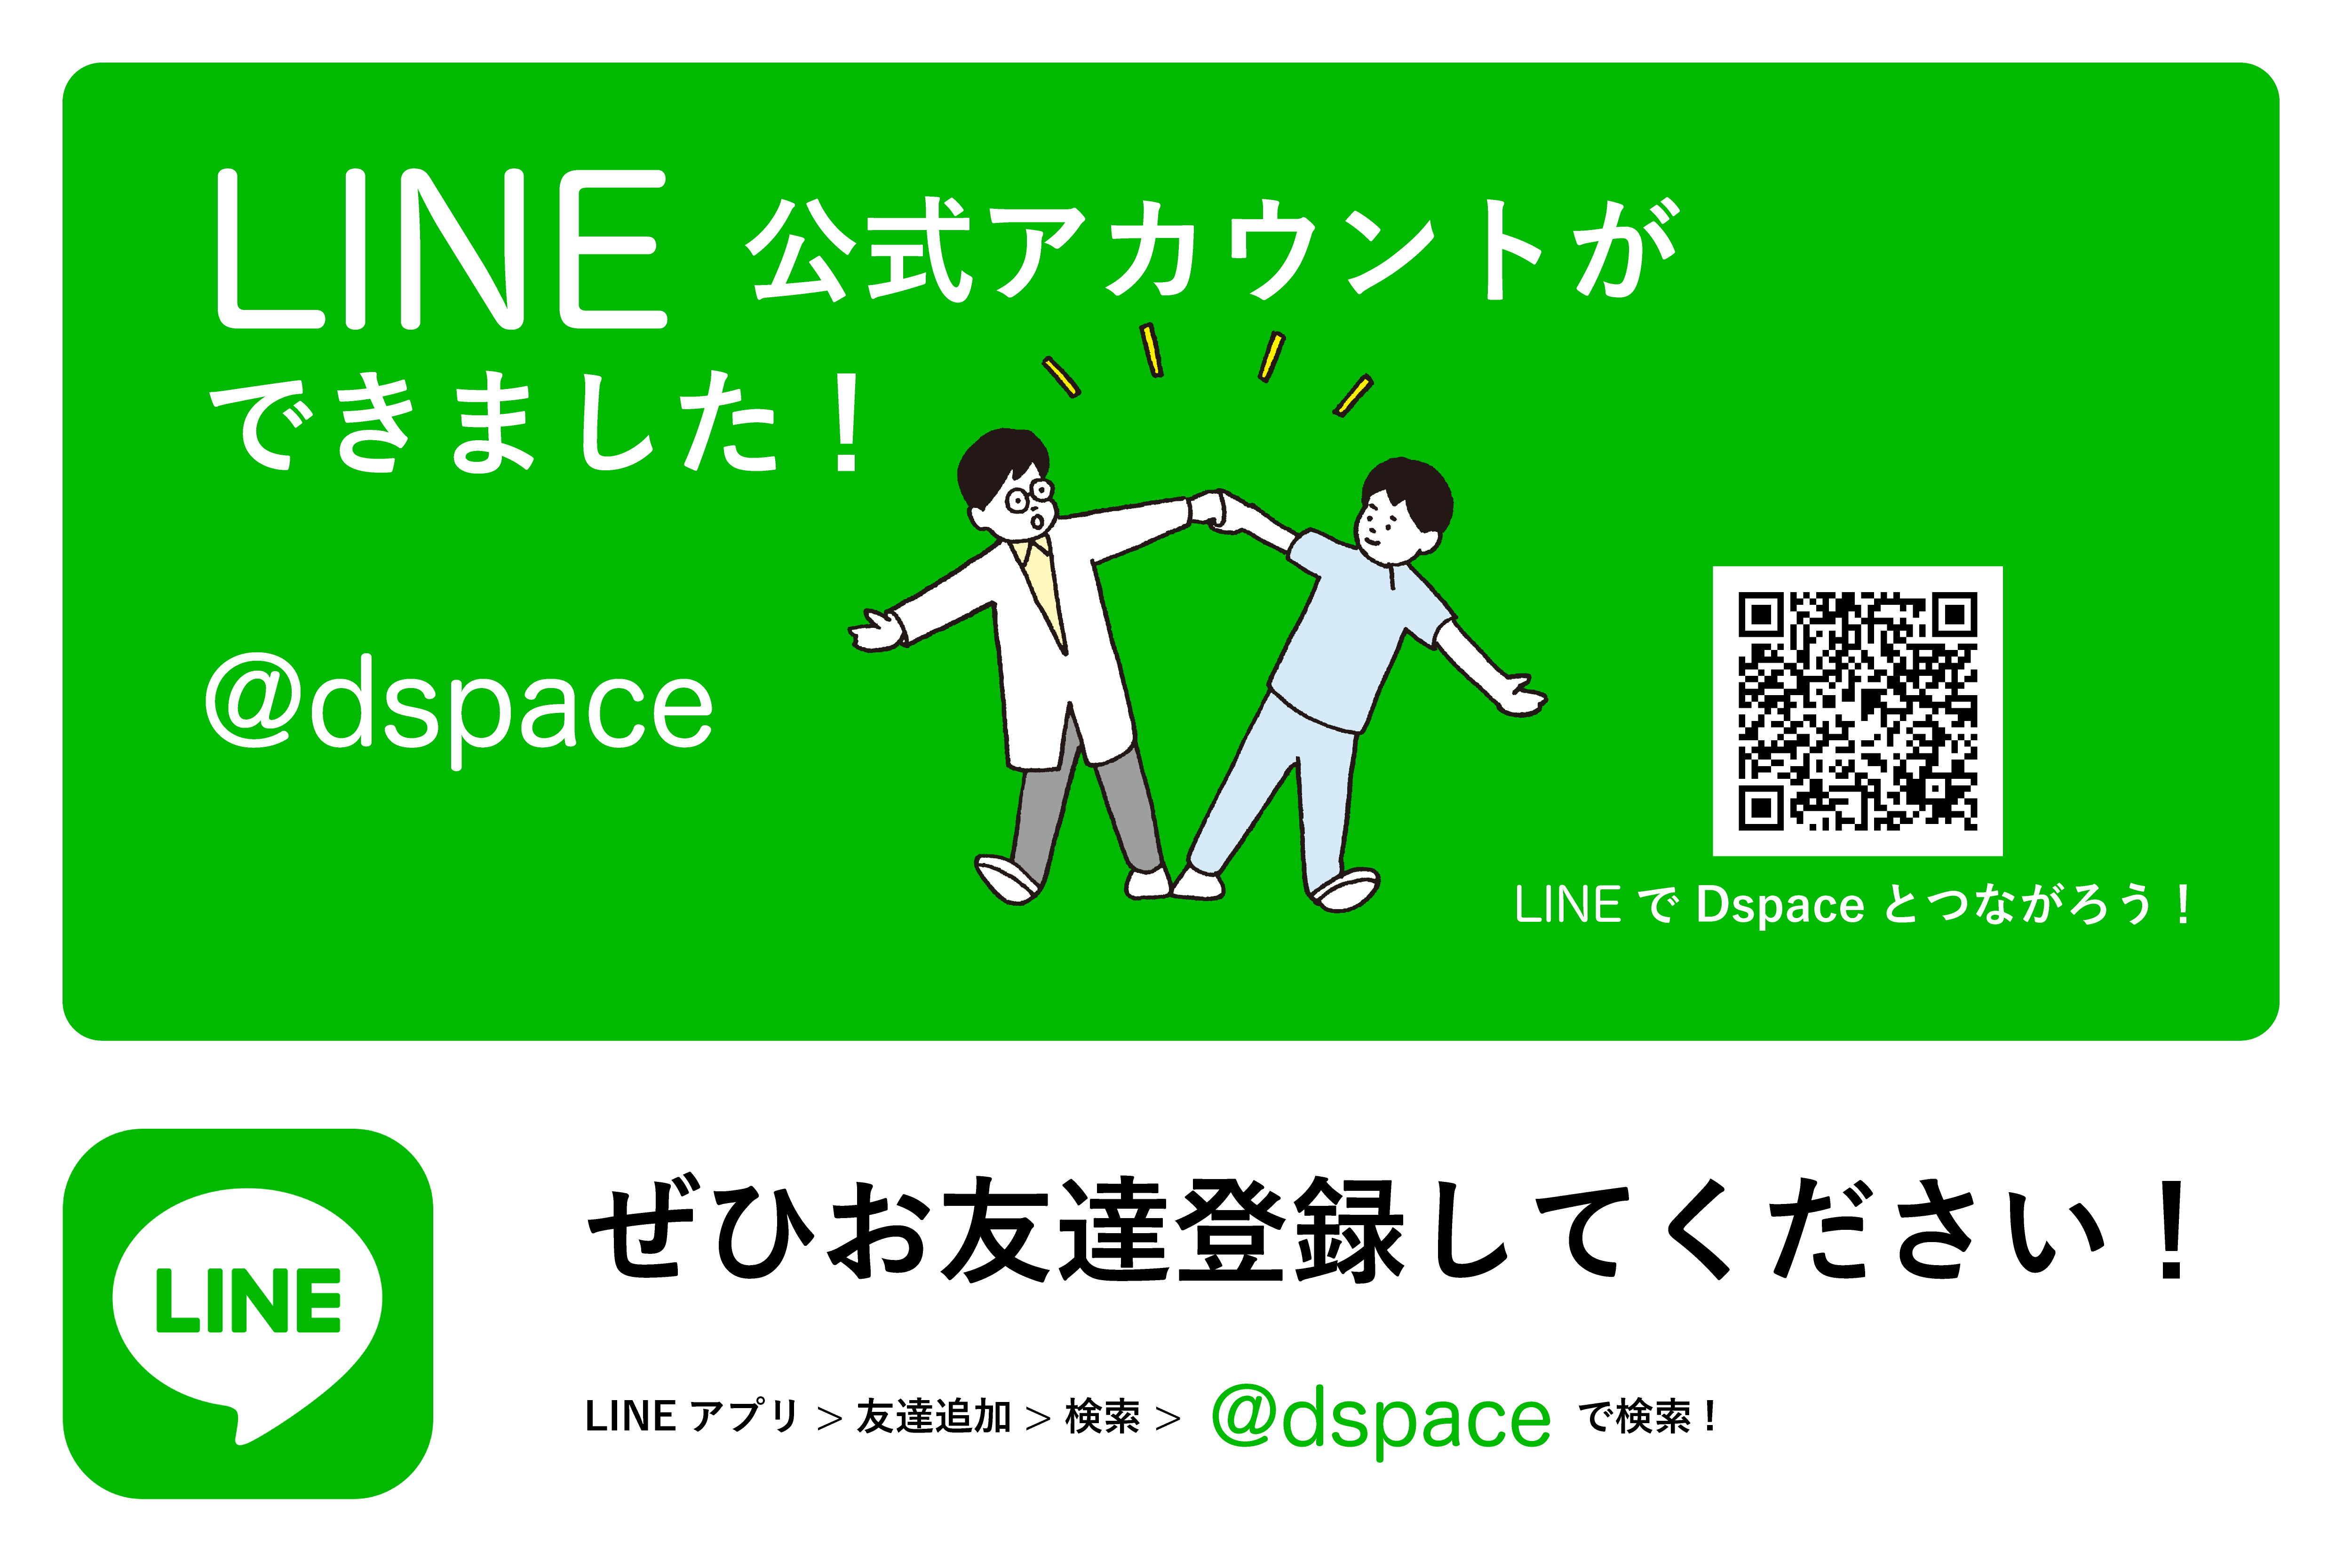 【Dspace LINE公式アカウント】のお知らせ アカウントID @dspace